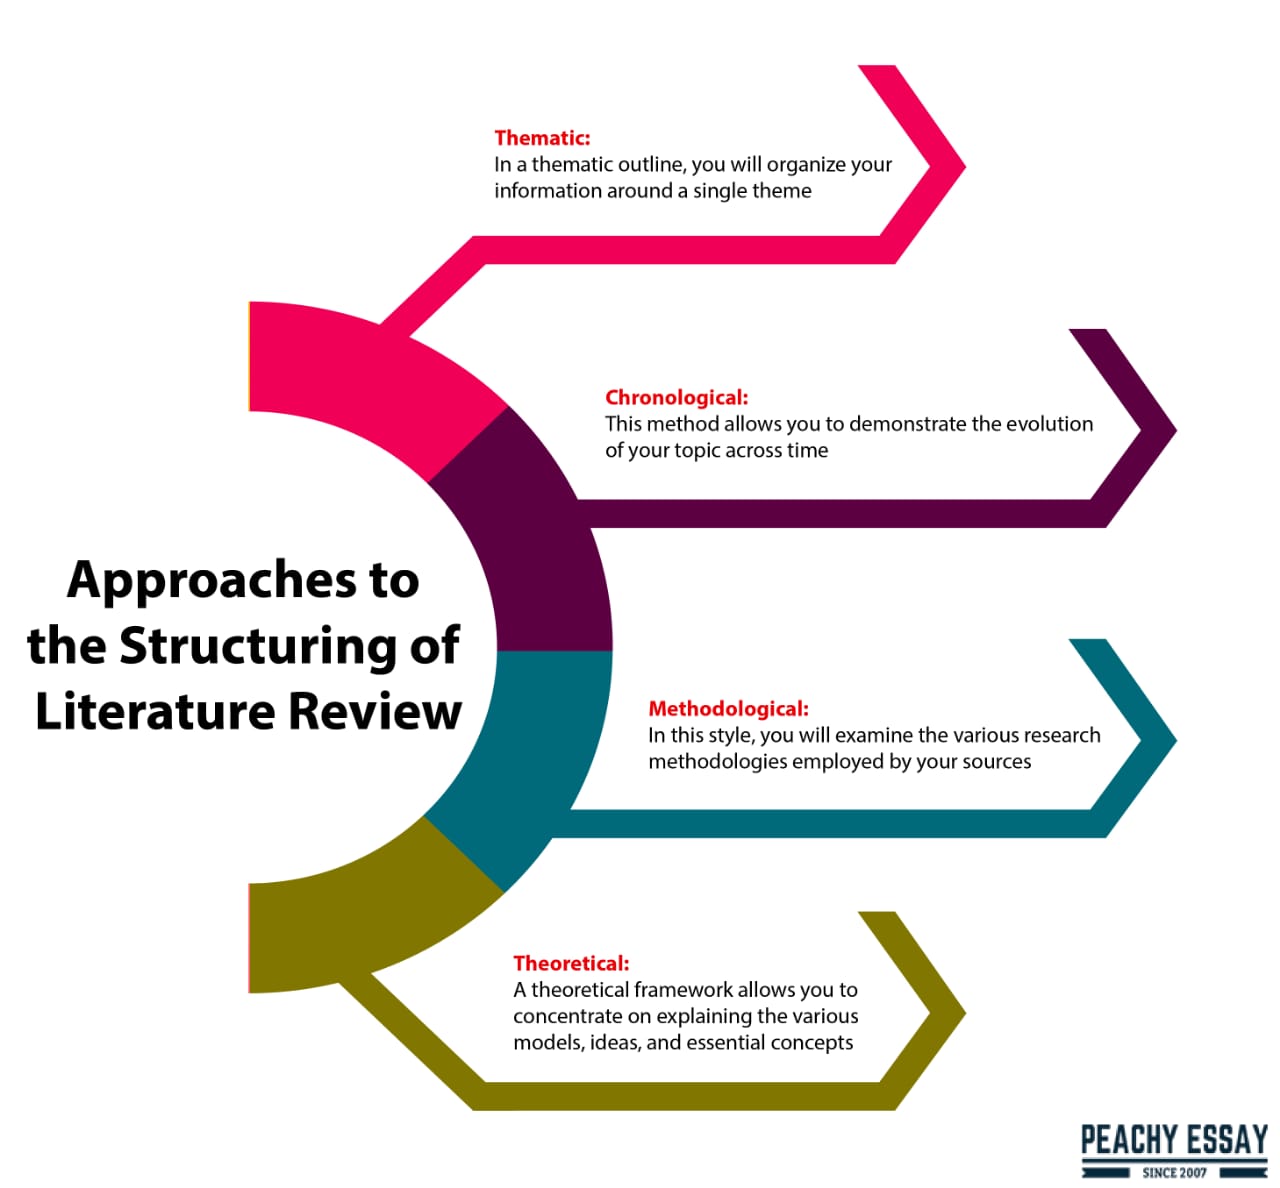 role of literature review to research